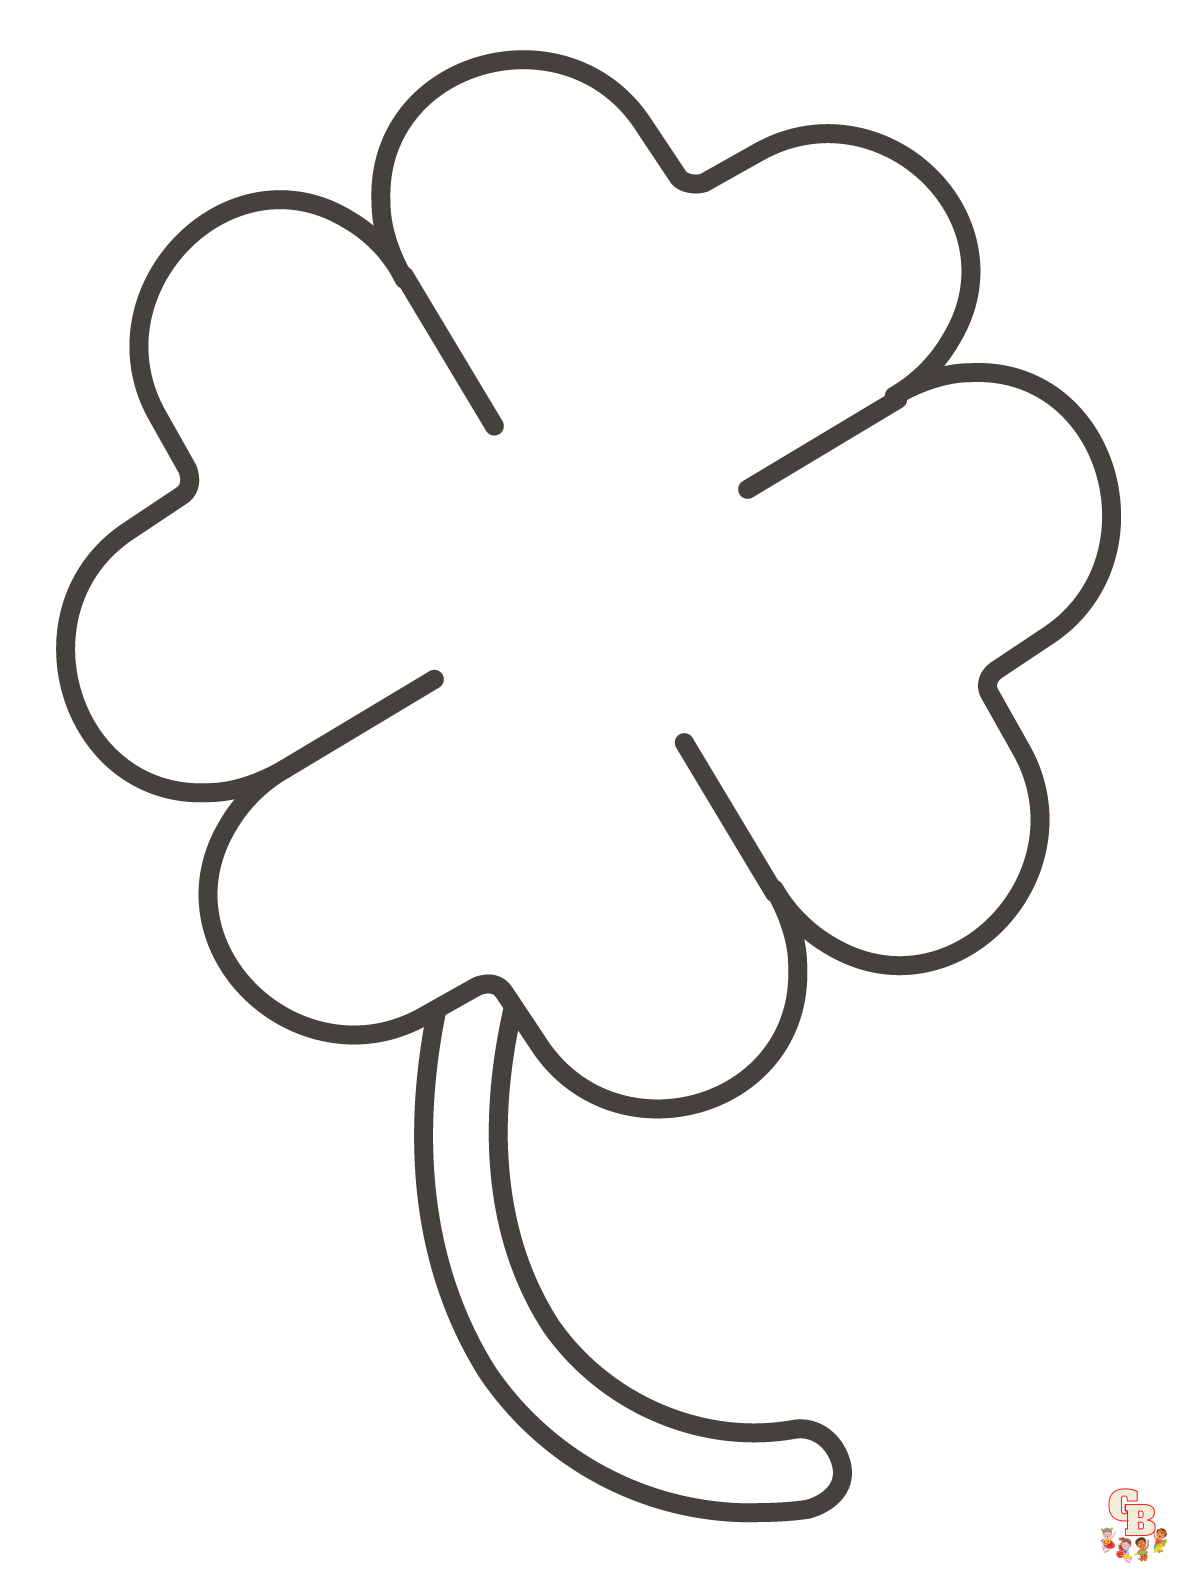 Four leaf clover coloring pages